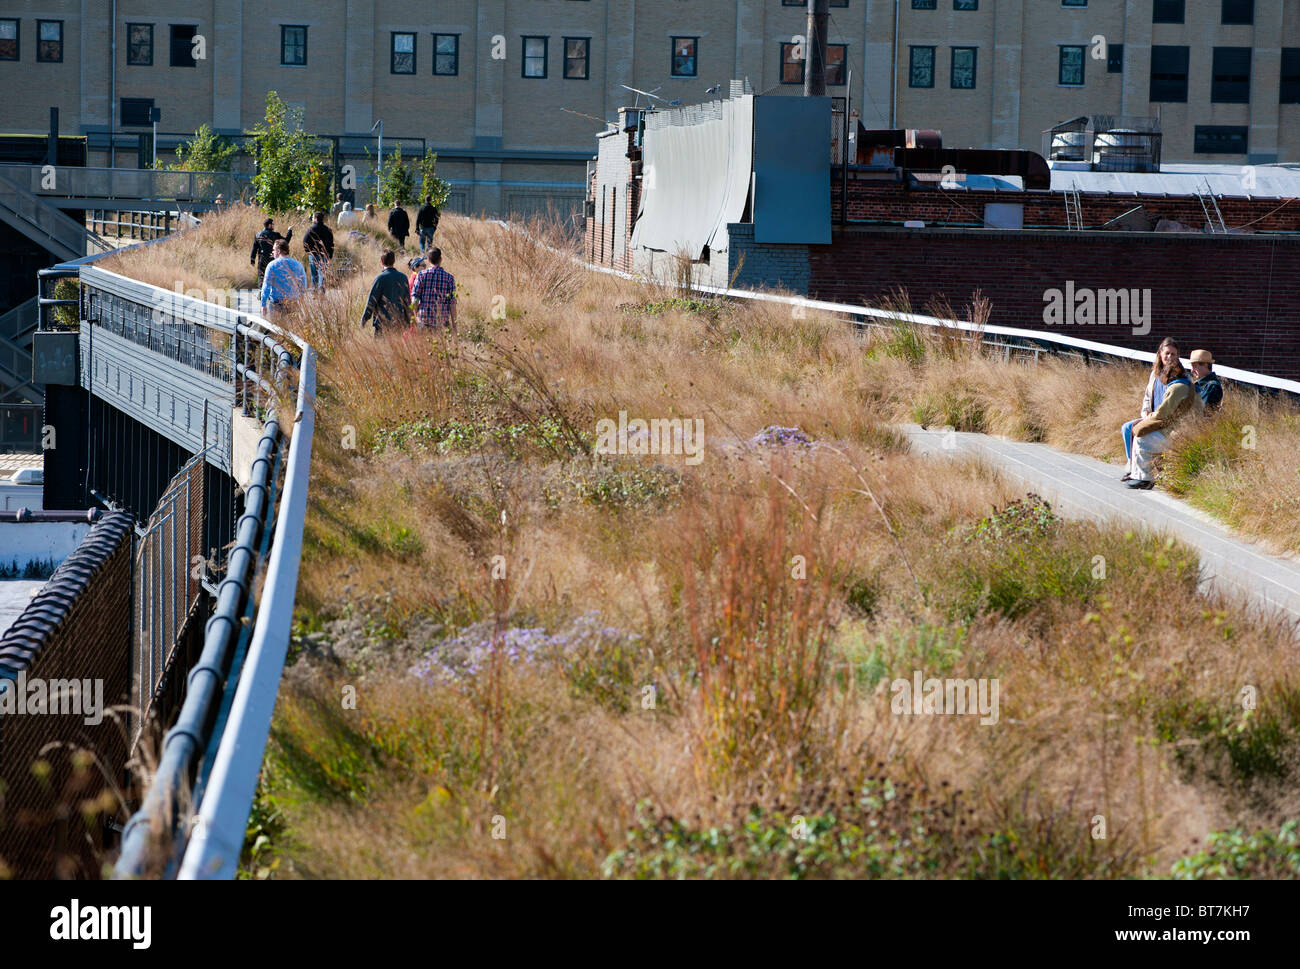 The High Line elevated landscaped public walkway built on old railway viaduct in Chelsea district of Manhattan in New York City Stock Photo